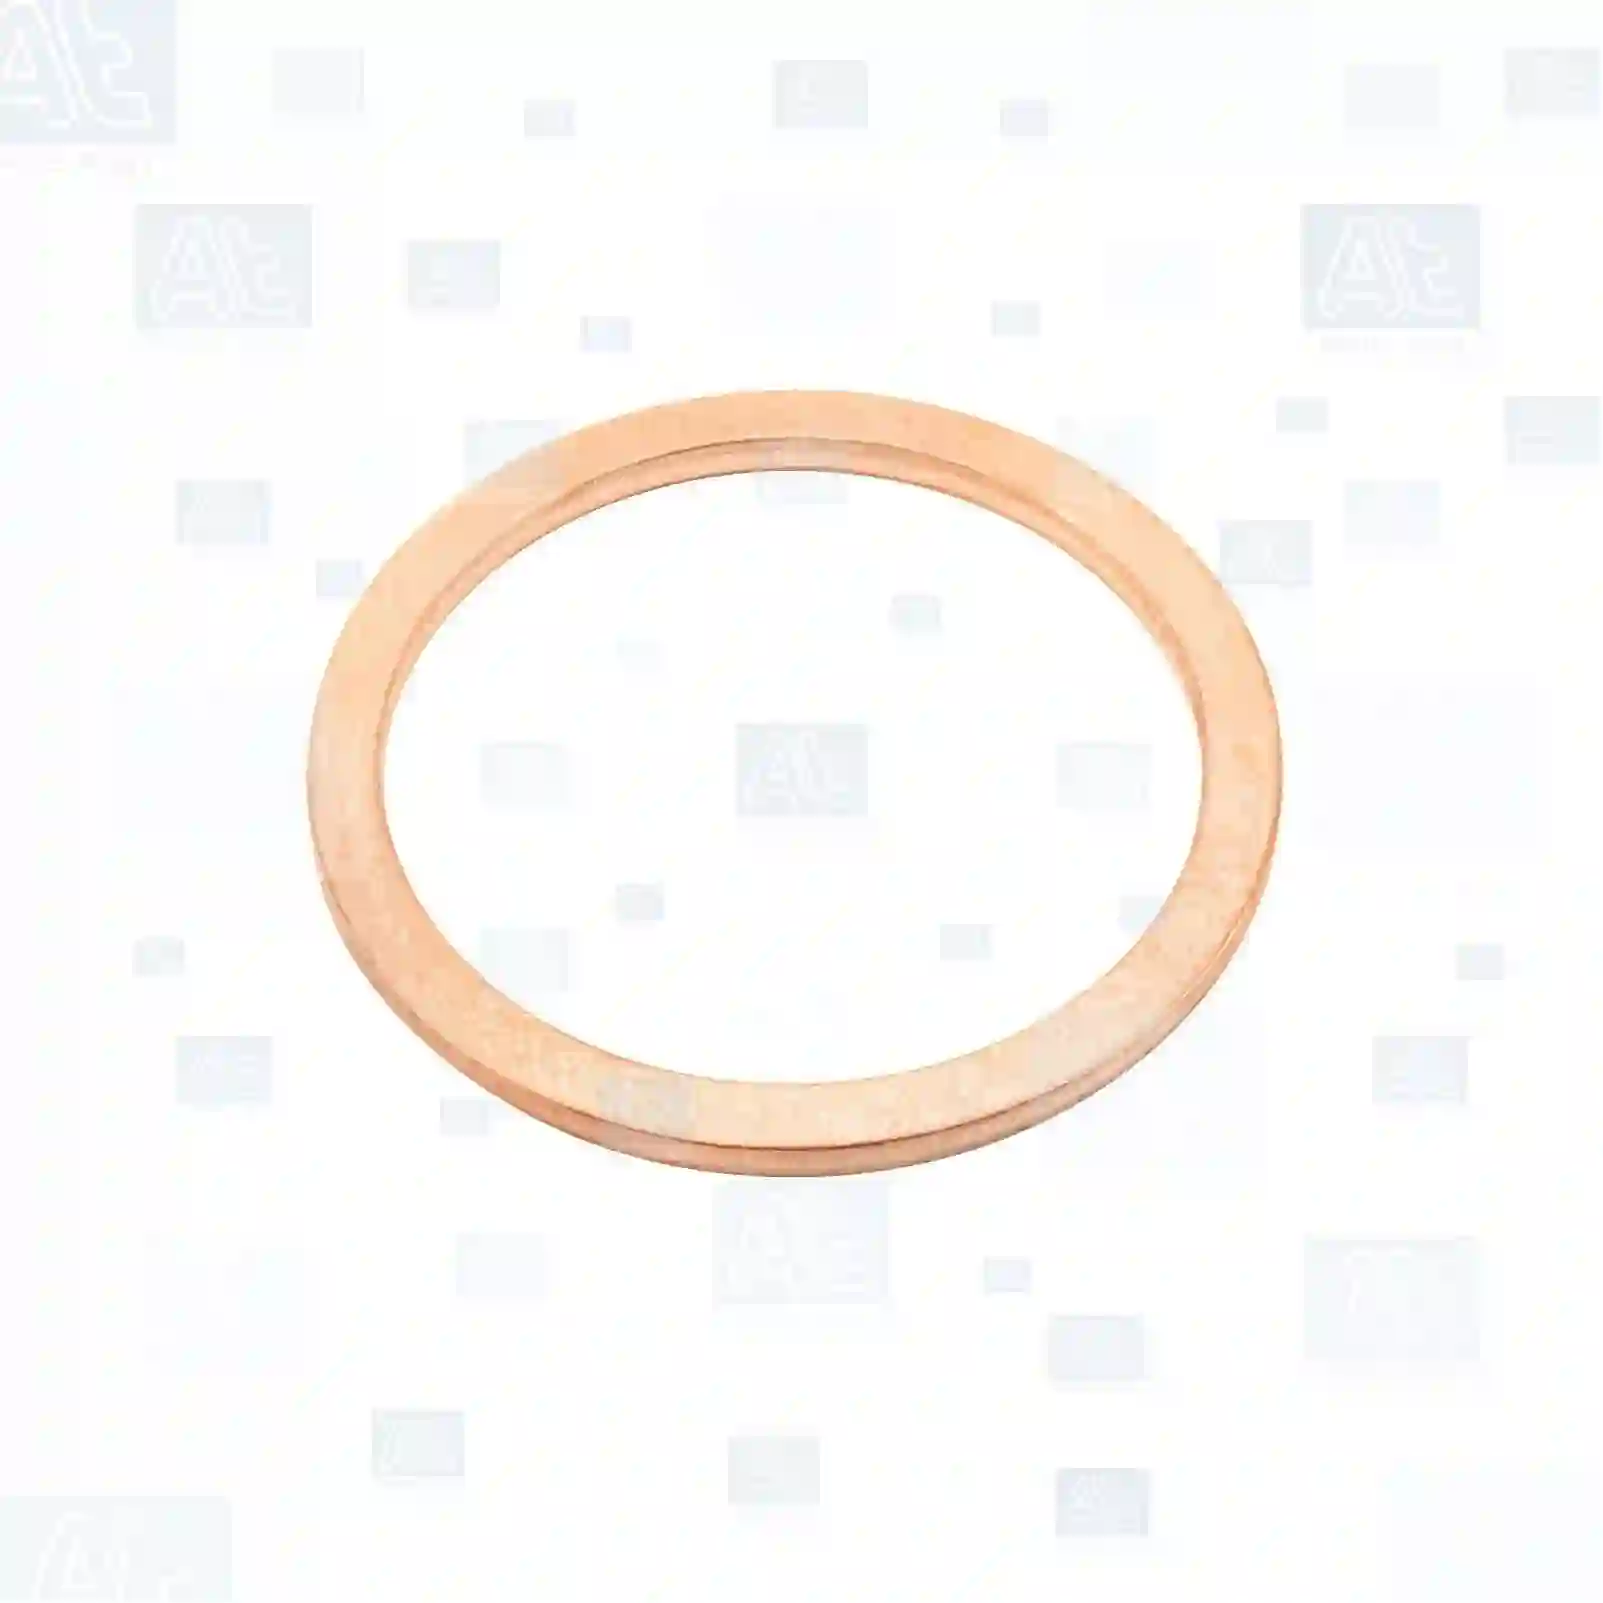 Copper washer, at no 77725022, oem no: 234032243, N0138271, 07119963354, 016484, 0119133, 119133, 01118737, 10263450, 16508460, 60800580, 1669199, 11022571, 0996731019, N007603022102, 717183R1, 10263460, 16508460, 01118737, 06561900718, 000000001085, 007603022102, 01118737, 604920102227, 662261, 016484, 90012301120, 0003143409, 0003143480, 0021323045, 7701039179, 182524, 182525, 192624, 35515, 812418, N0138271, N0138271, 681430, 947627, N0138271, N138271, ZG40223-0008 At Spare Part | Engine, Accelerator Pedal, Camshaft, Connecting Rod, Crankcase, Crankshaft, Cylinder Head, Engine Suspension Mountings, Exhaust Manifold, Exhaust Gas Recirculation, Filter Kits, Flywheel Housing, General Overhaul Kits, Engine, Intake Manifold, Oil Cleaner, Oil Cooler, Oil Filter, Oil Pump, Oil Sump, Piston & Liner, Sensor & Switch, Timing Case, Turbocharger, Cooling System, Belt Tensioner, Coolant Filter, Coolant Pipe, Corrosion Prevention Agent, Drive, Expansion Tank, Fan, Intercooler, Monitors & Gauges, Radiator, Thermostat, V-Belt / Timing belt, Water Pump, Fuel System, Electronical Injector Unit, Feed Pump, Fuel Filter, cpl., Fuel Gauge Sender,  Fuel Line, Fuel Pump, Fuel Tank, Injection Line Kit, Injection Pump, Exhaust System, Clutch & Pedal, Gearbox, Propeller Shaft, Axles, Brake System, Hubs & Wheels, Suspension, Leaf Spring, Universal Parts / Accessories, Steering, Electrical System, Cabin Copper washer, at no 77725022, oem no: 234032243, N0138271, 07119963354, 016484, 0119133, 119133, 01118737, 10263450, 16508460, 60800580, 1669199, 11022571, 0996731019, N007603022102, 717183R1, 10263460, 16508460, 01118737, 06561900718, 000000001085, 007603022102, 01118737, 604920102227, 662261, 016484, 90012301120, 0003143409, 0003143480, 0021323045, 7701039179, 182524, 182525, 192624, 35515, 812418, N0138271, N0138271, 681430, 947627, N0138271, N138271, ZG40223-0008 At Spare Part | Engine, Accelerator Pedal, Camshaft, Connecting Rod, Crankcase, Crankshaft, Cylinder Head, Engine Suspension Mountings, Exhaust Manifold, Exhaust Gas Recirculation, Filter Kits, Flywheel Housing, General Overhaul Kits, Engine, Intake Manifold, Oil Cleaner, Oil Cooler, Oil Filter, Oil Pump, Oil Sump, Piston & Liner, Sensor & Switch, Timing Case, Turbocharger, Cooling System, Belt Tensioner, Coolant Filter, Coolant Pipe, Corrosion Prevention Agent, Drive, Expansion Tank, Fan, Intercooler, Monitors & Gauges, Radiator, Thermostat, V-Belt / Timing belt, Water Pump, Fuel System, Electronical Injector Unit, Feed Pump, Fuel Filter, cpl., Fuel Gauge Sender,  Fuel Line, Fuel Pump, Fuel Tank, Injection Line Kit, Injection Pump, Exhaust System, Clutch & Pedal, Gearbox, Propeller Shaft, Axles, Brake System, Hubs & Wheels, Suspension, Leaf Spring, Universal Parts / Accessories, Steering, Electrical System, Cabin